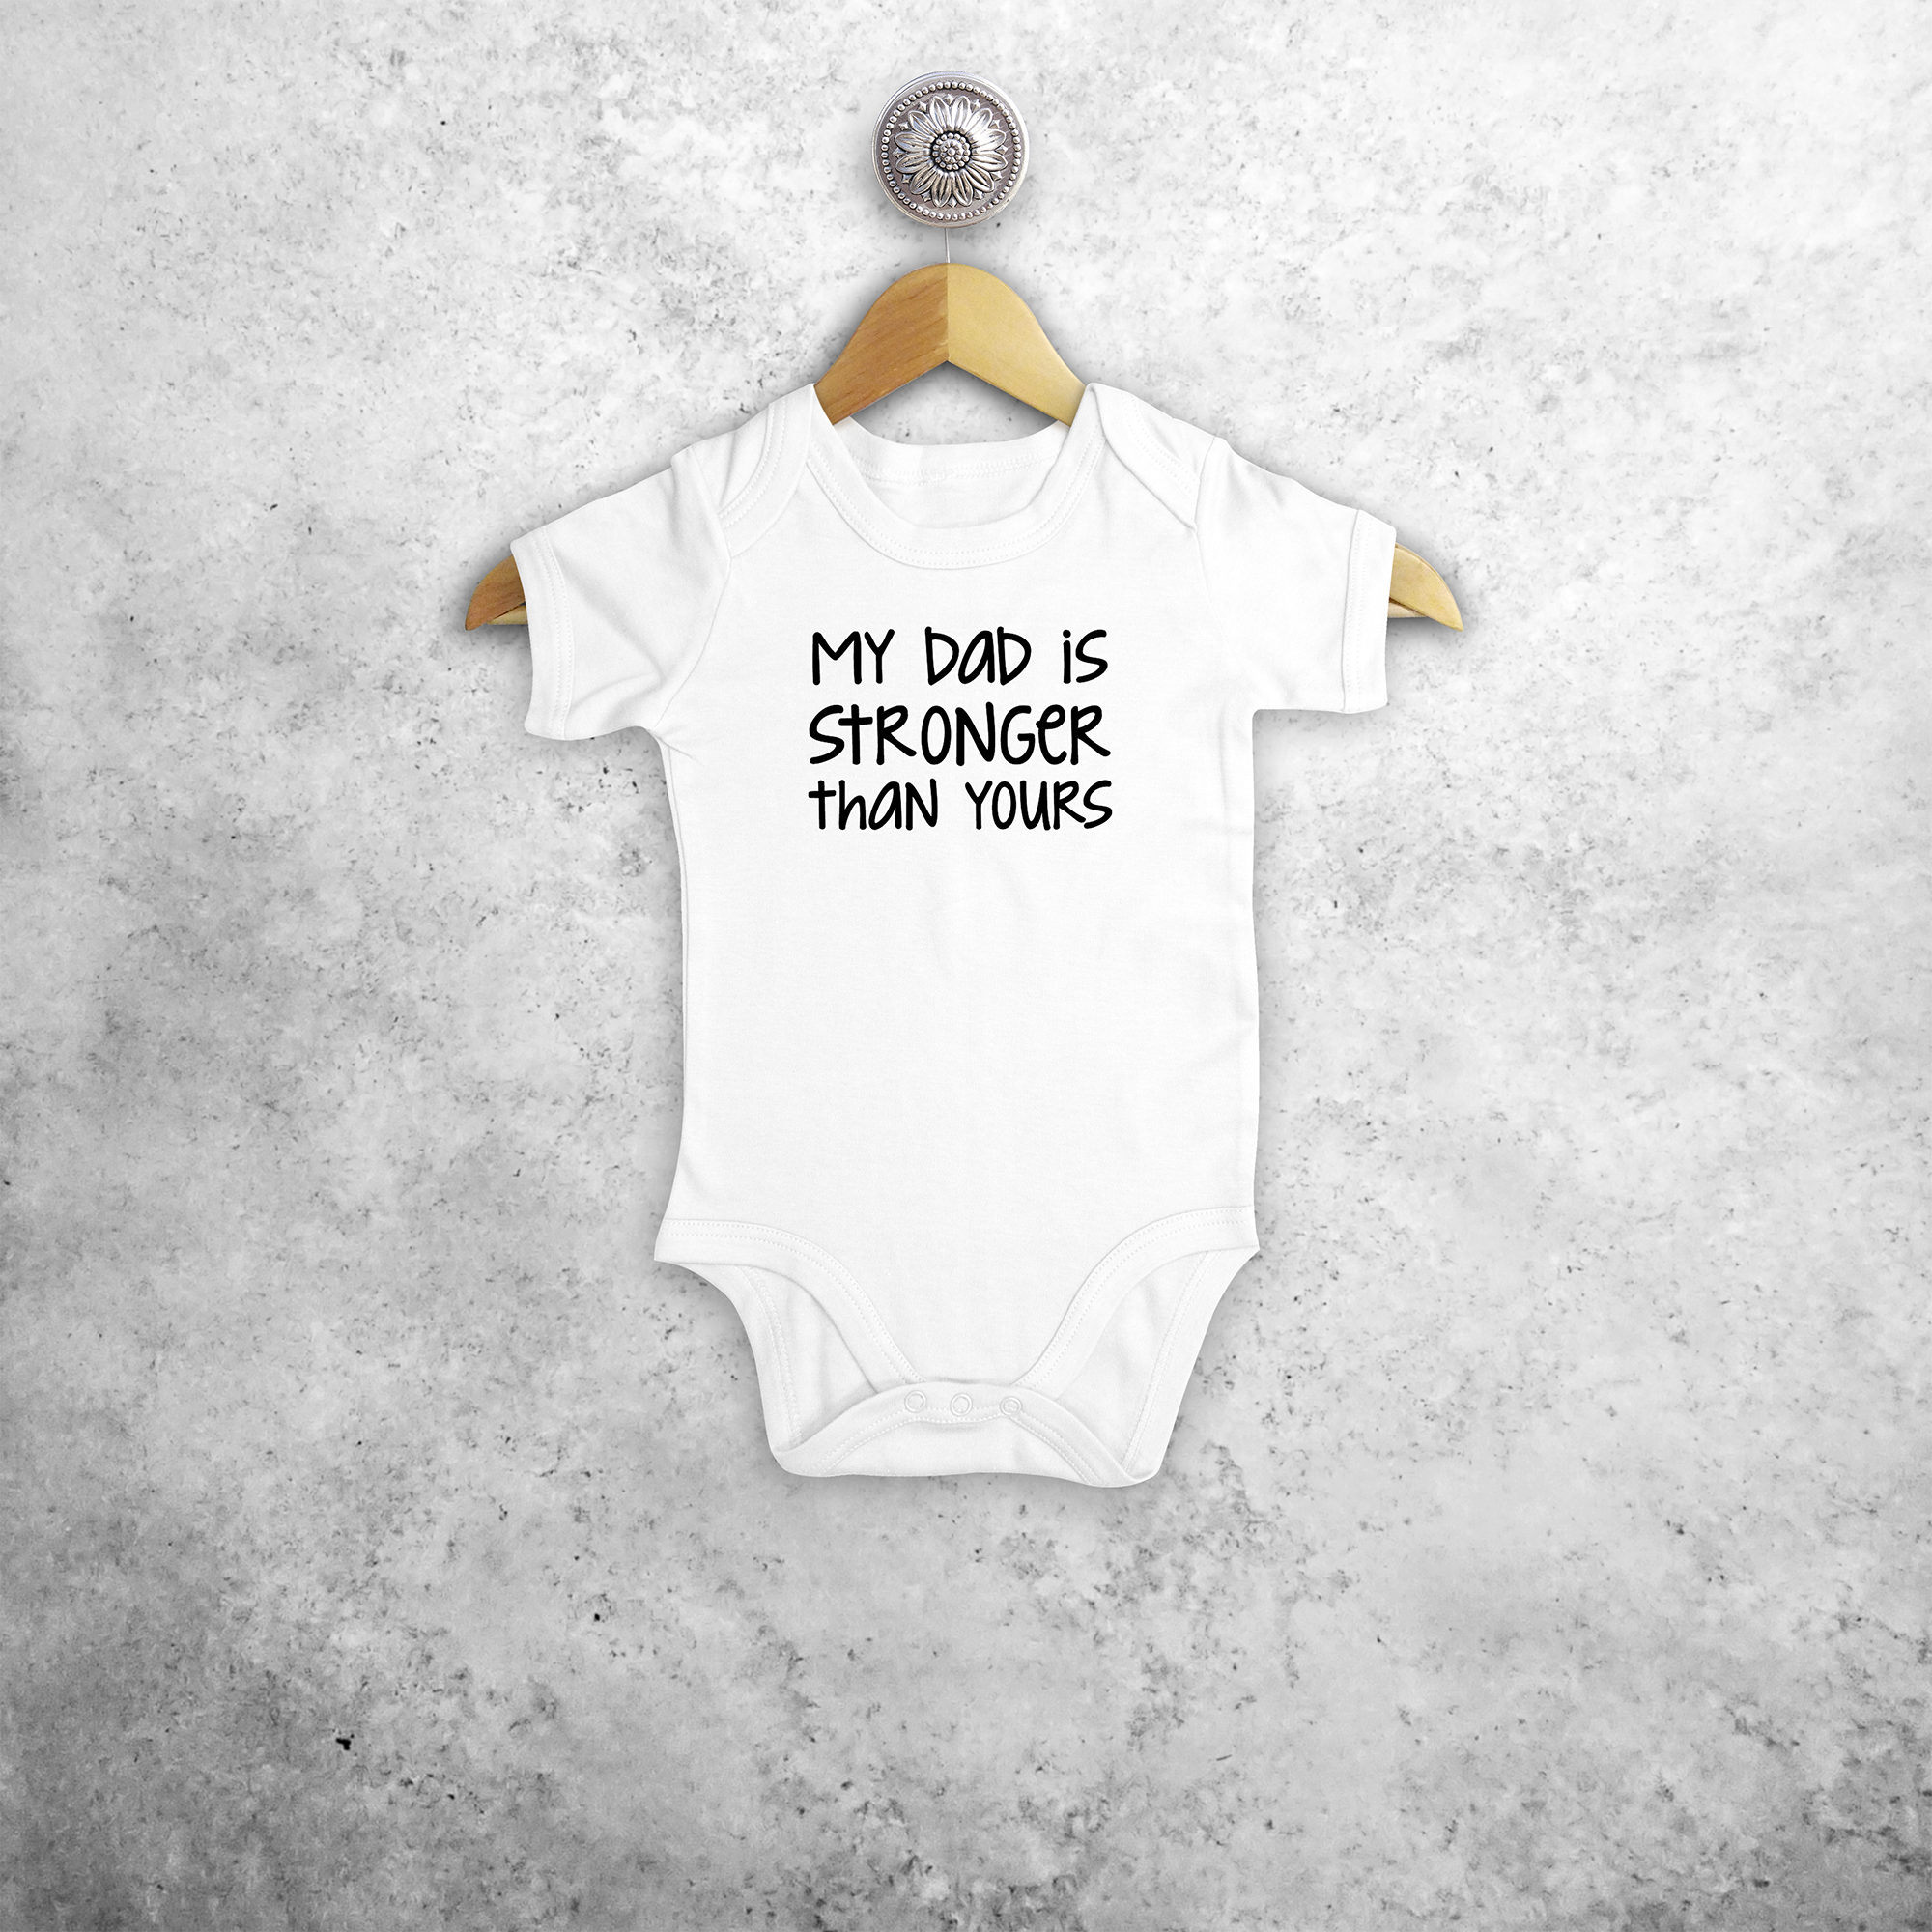 'My dad is stronger than yours' baby shortsleeve bodysuit